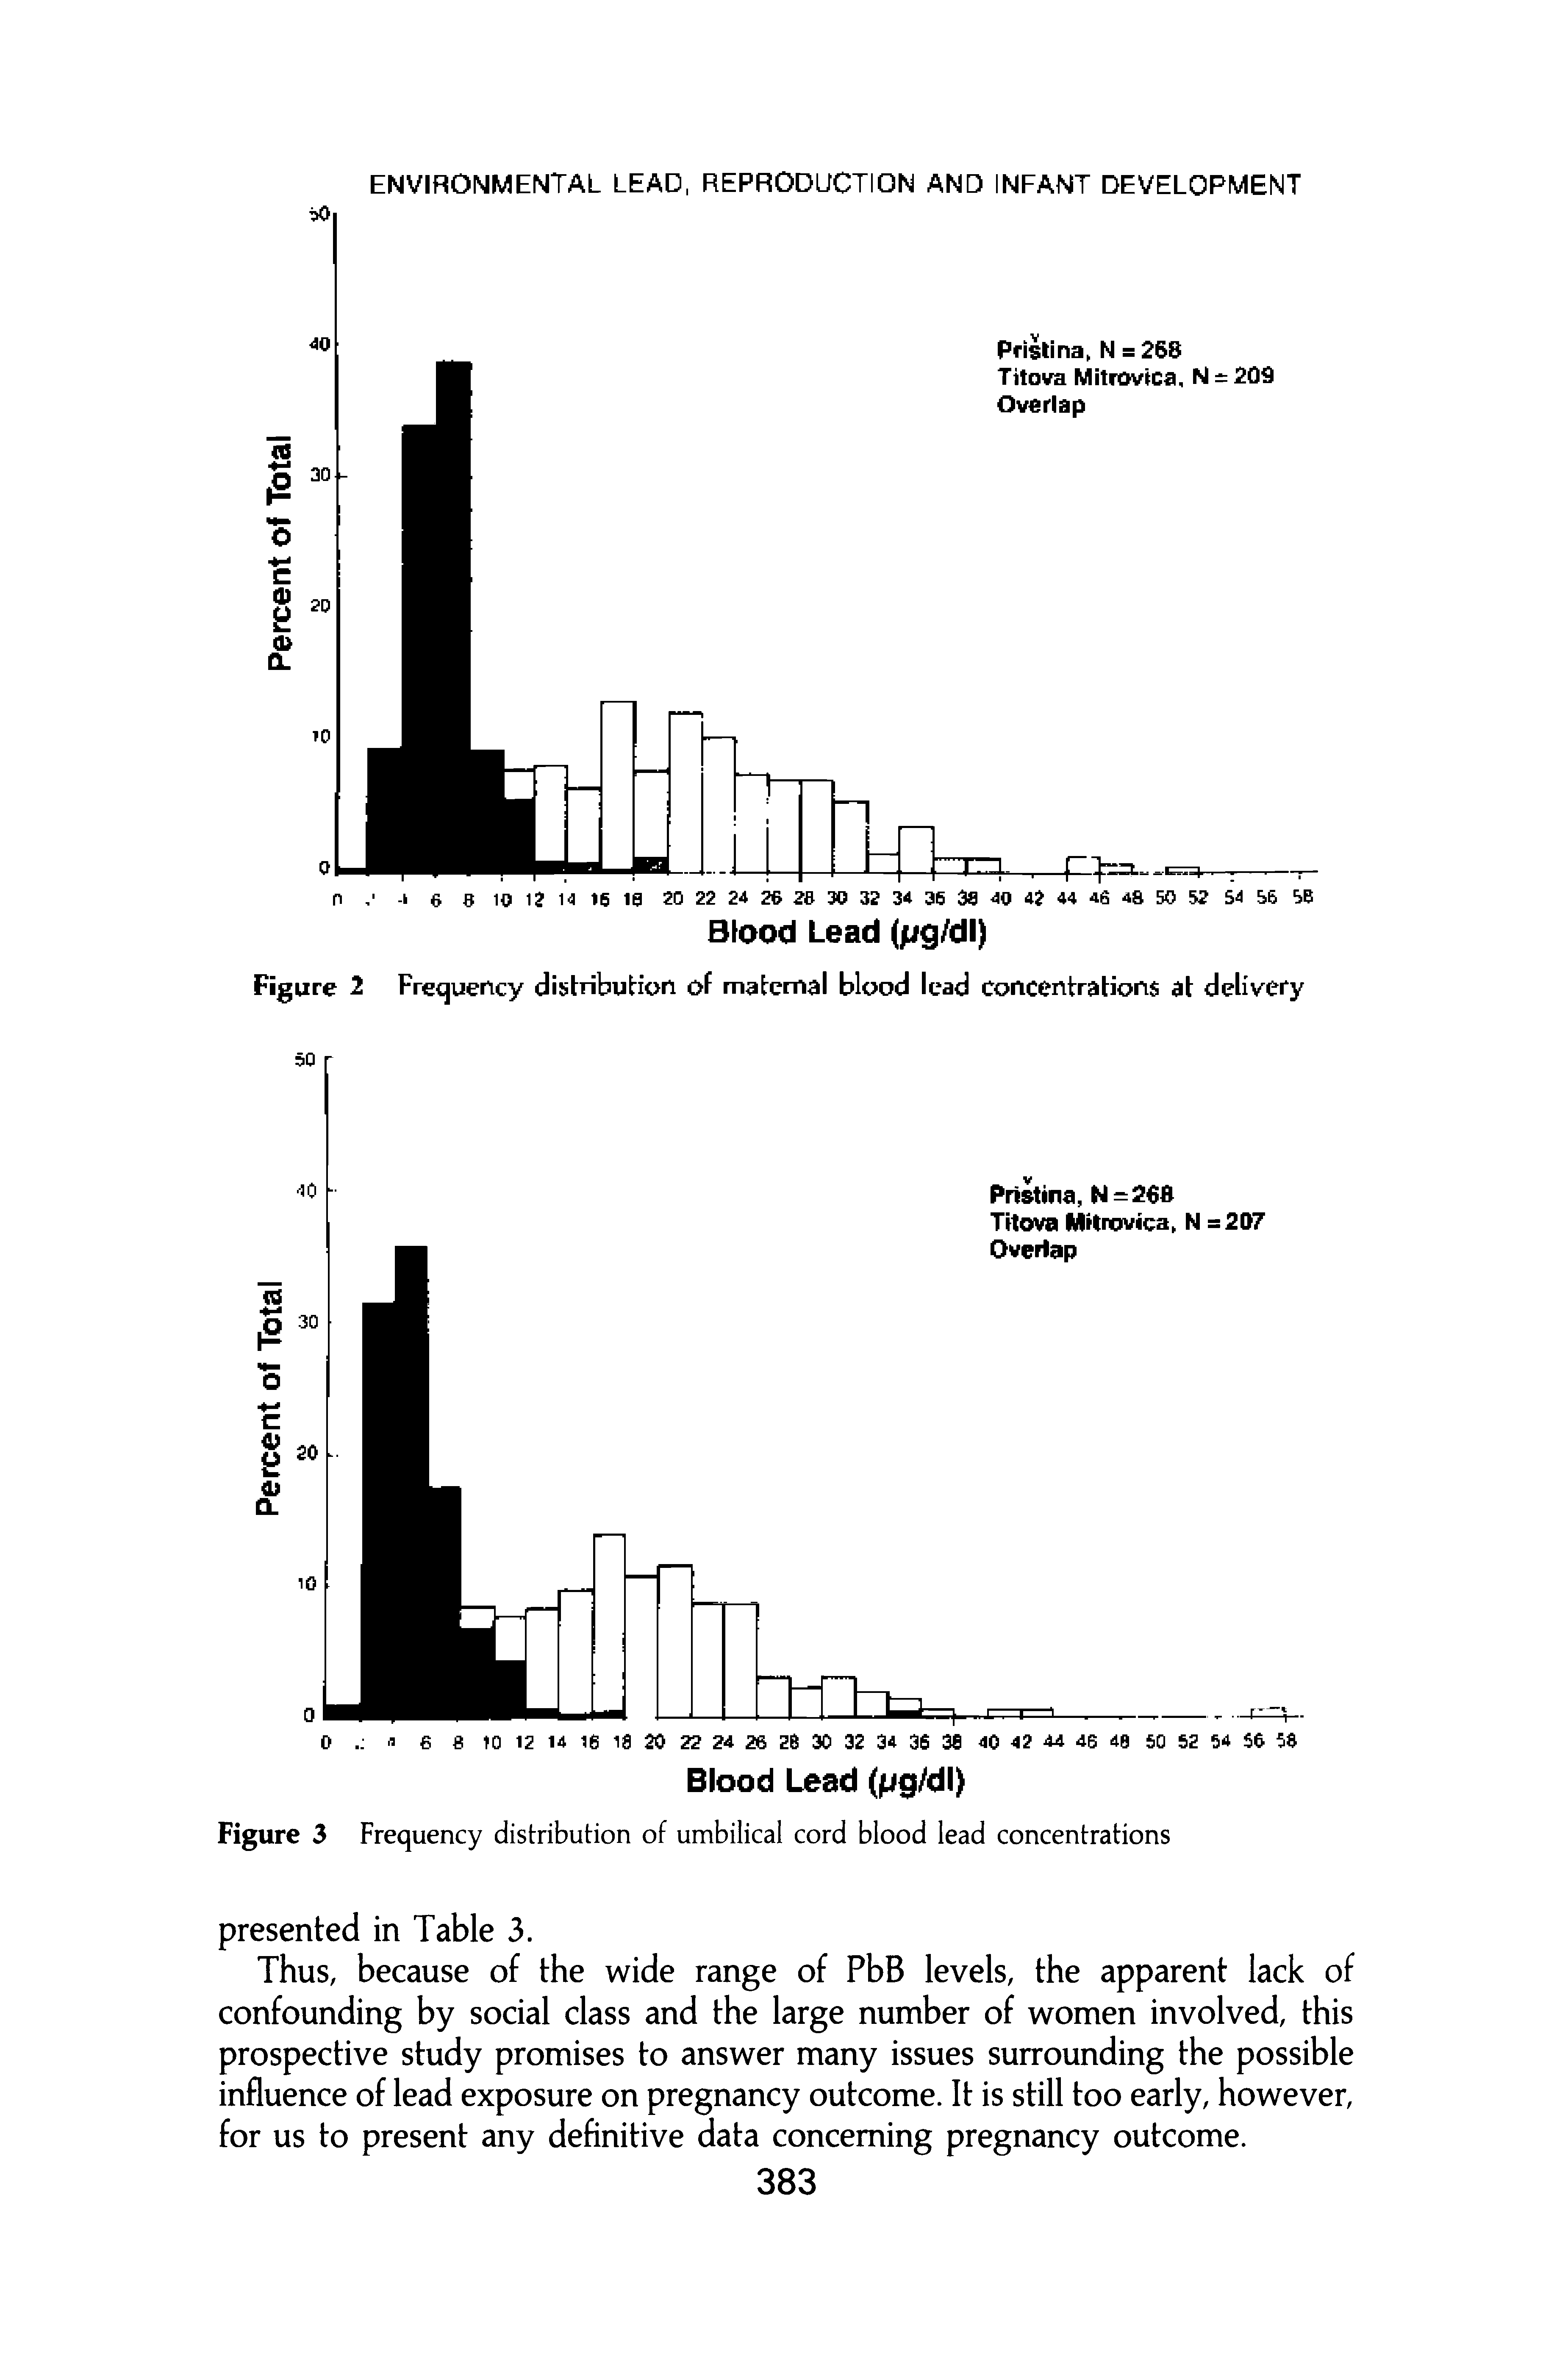 Figure 3 Frequency distribution of umbilical cord blood lead concentrations...